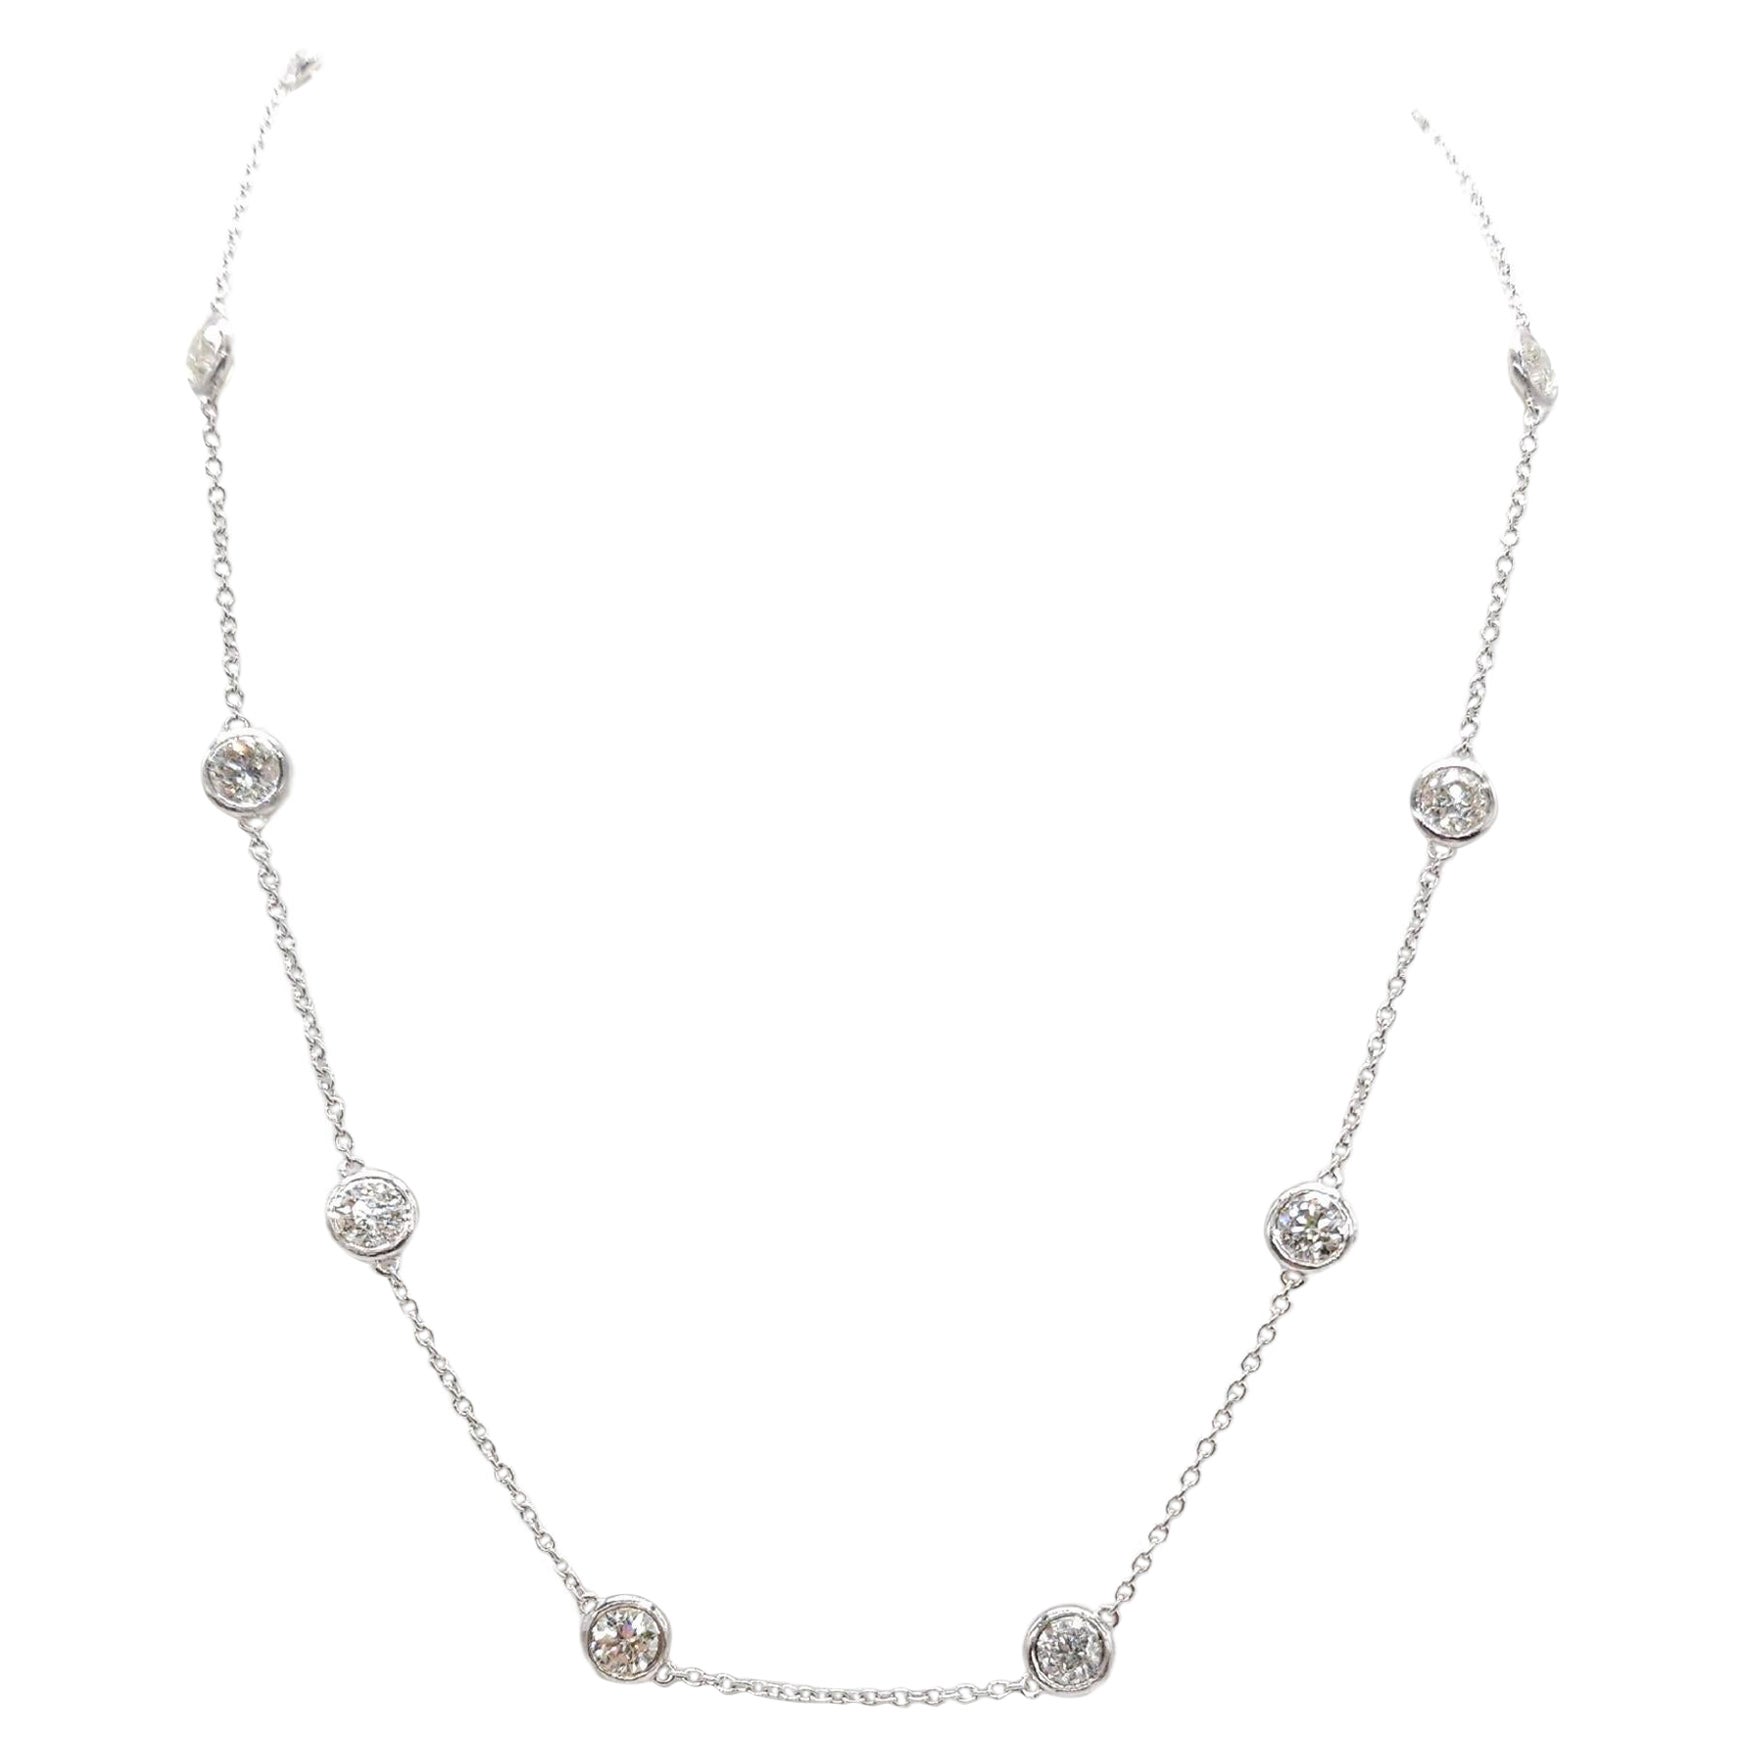 5.03 Carat 10 Station Diamond by the Yard Necklace 14 Karat White Gold 16" For Sale